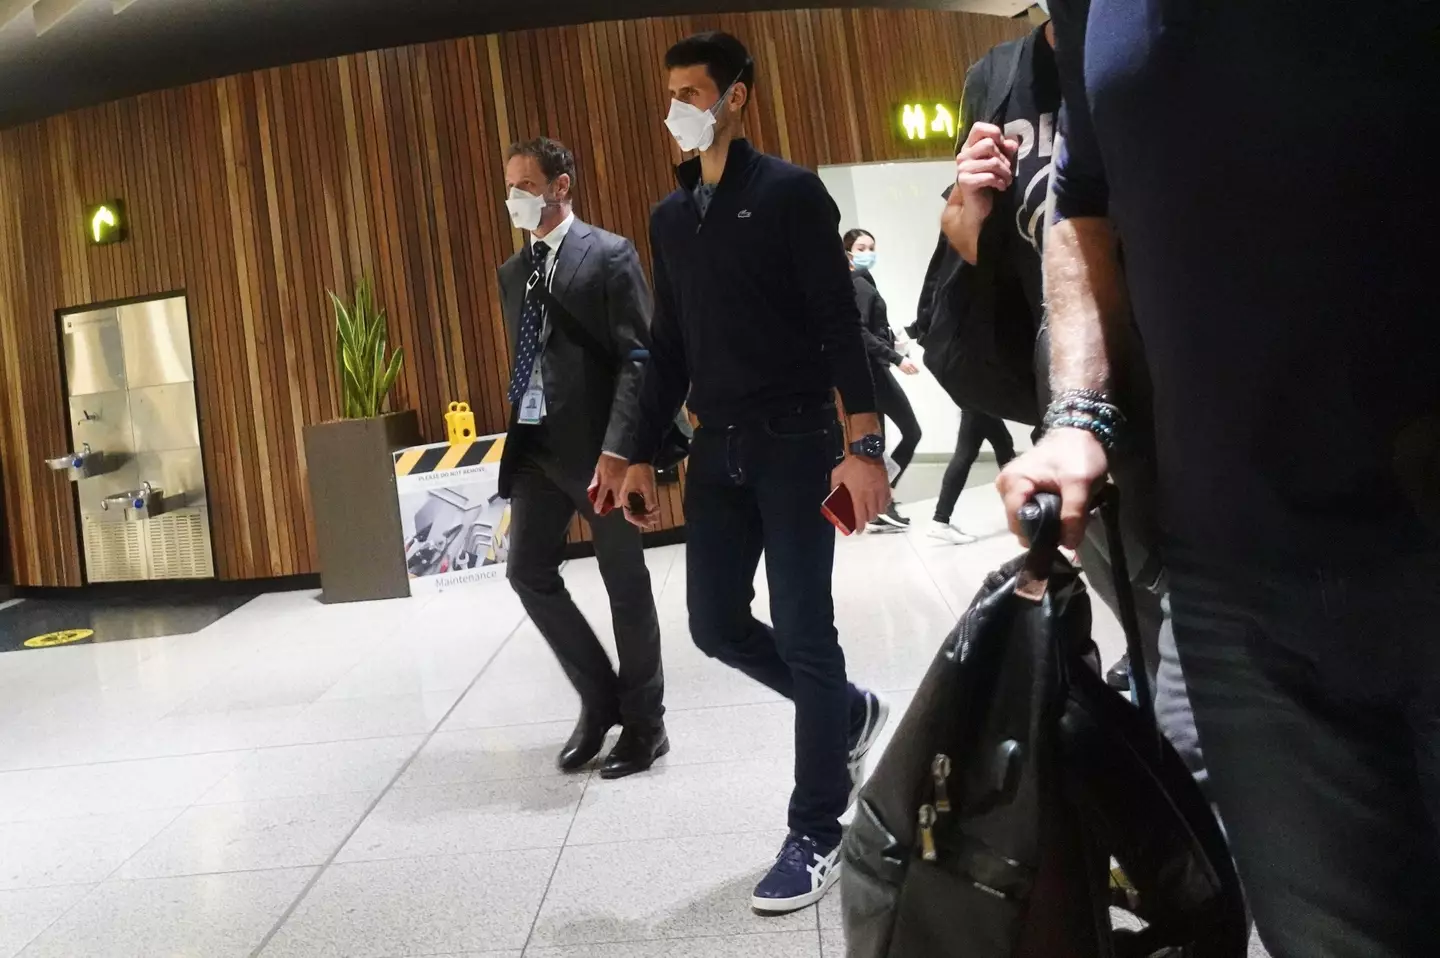 Serbian tennis player Novak Djokovic walks in Melbourne Airport before boarding a flight, after the Federal Court upheld a government decision to cancel his visa to play in the Australian Open, in Melbourne.